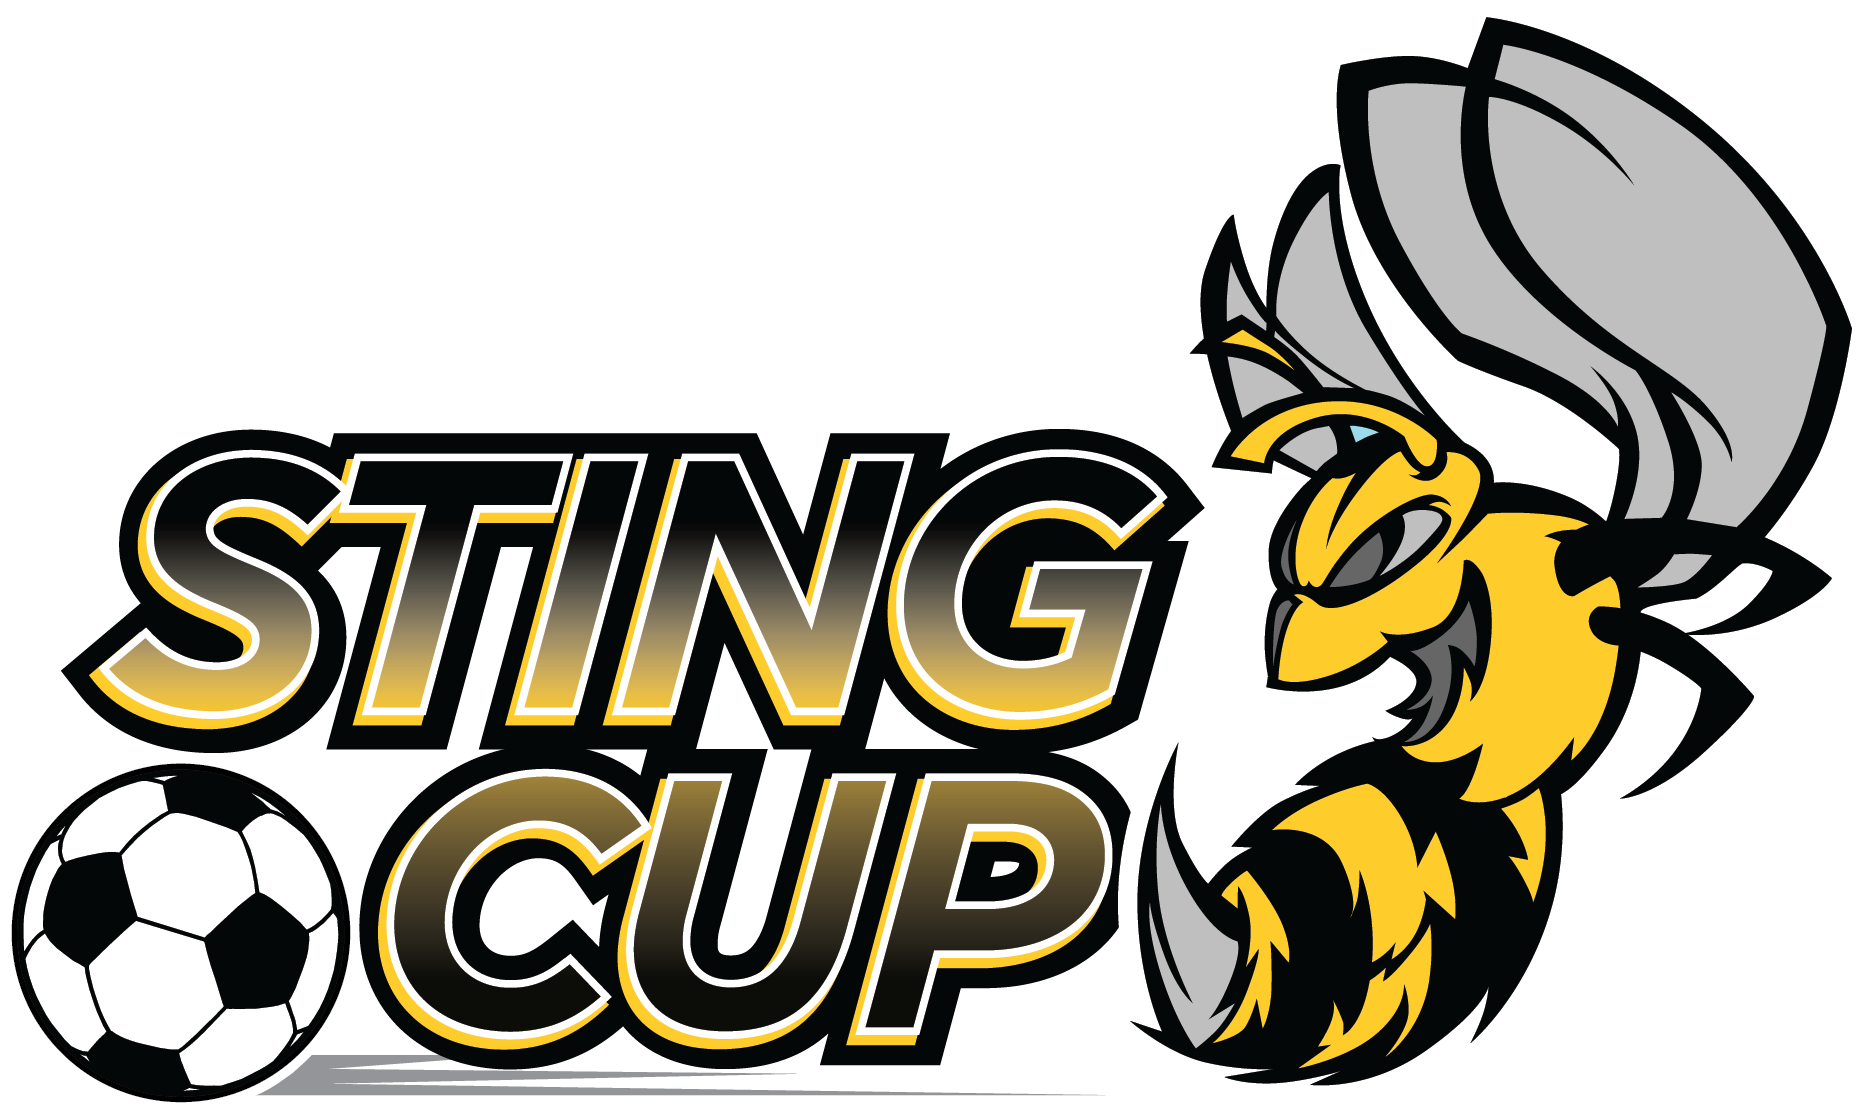 Sting Cup Banner - Bee Tablet - Ipad 2nd, 3rd, 4th Gen (horizontal) (1862x1120)